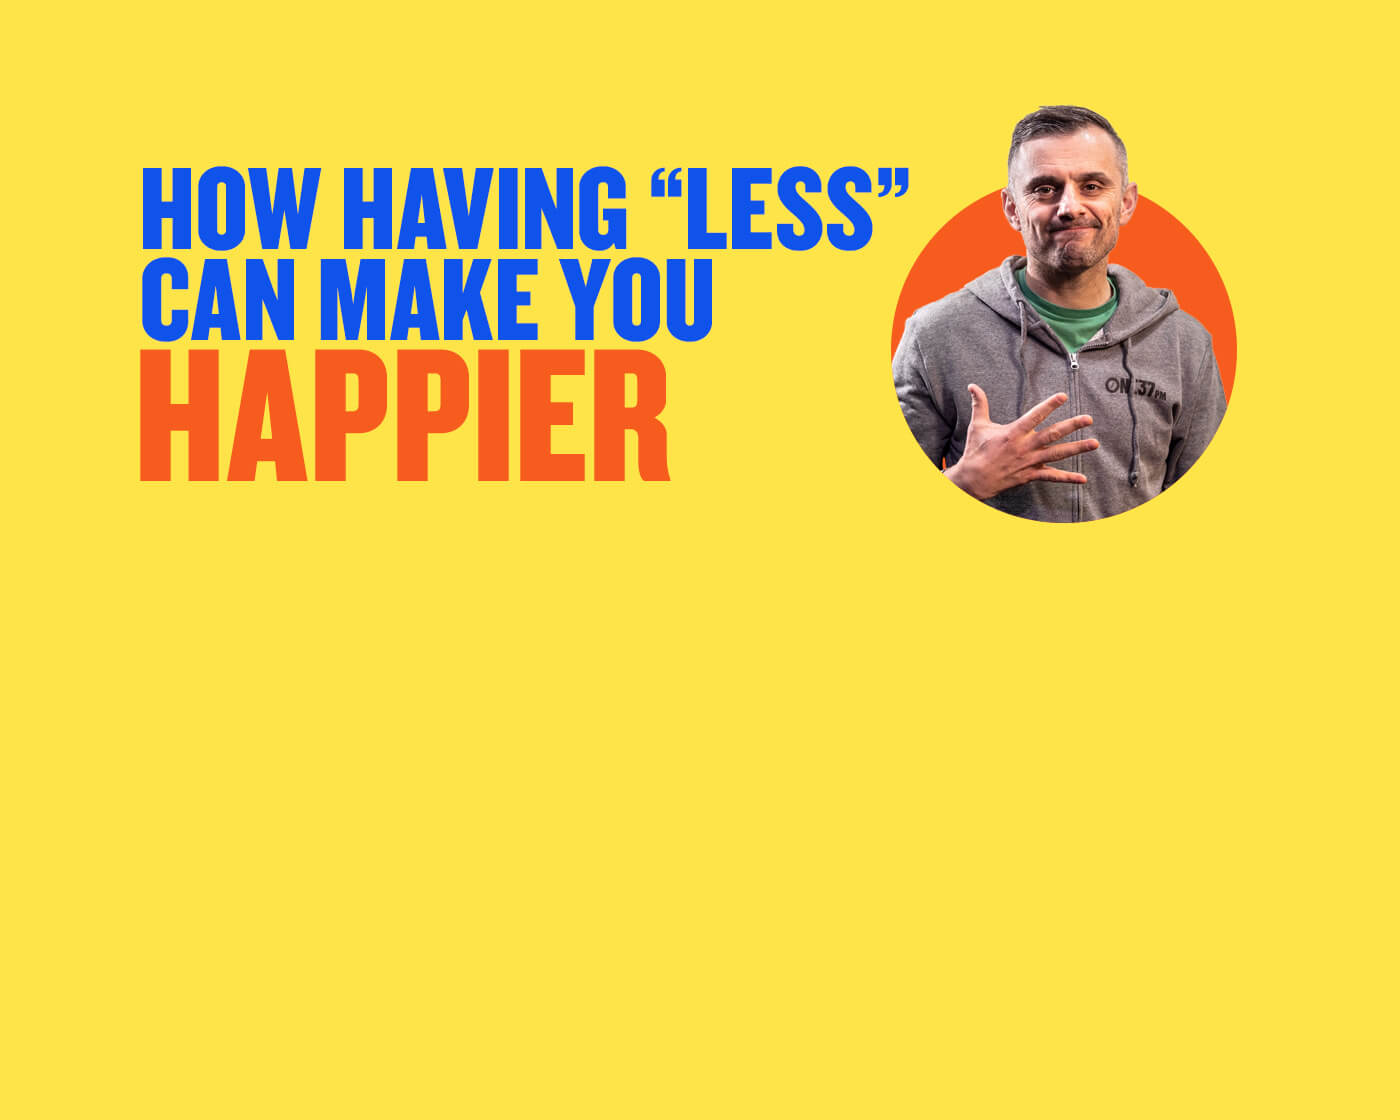 How Having “Less” Can Make You Happier